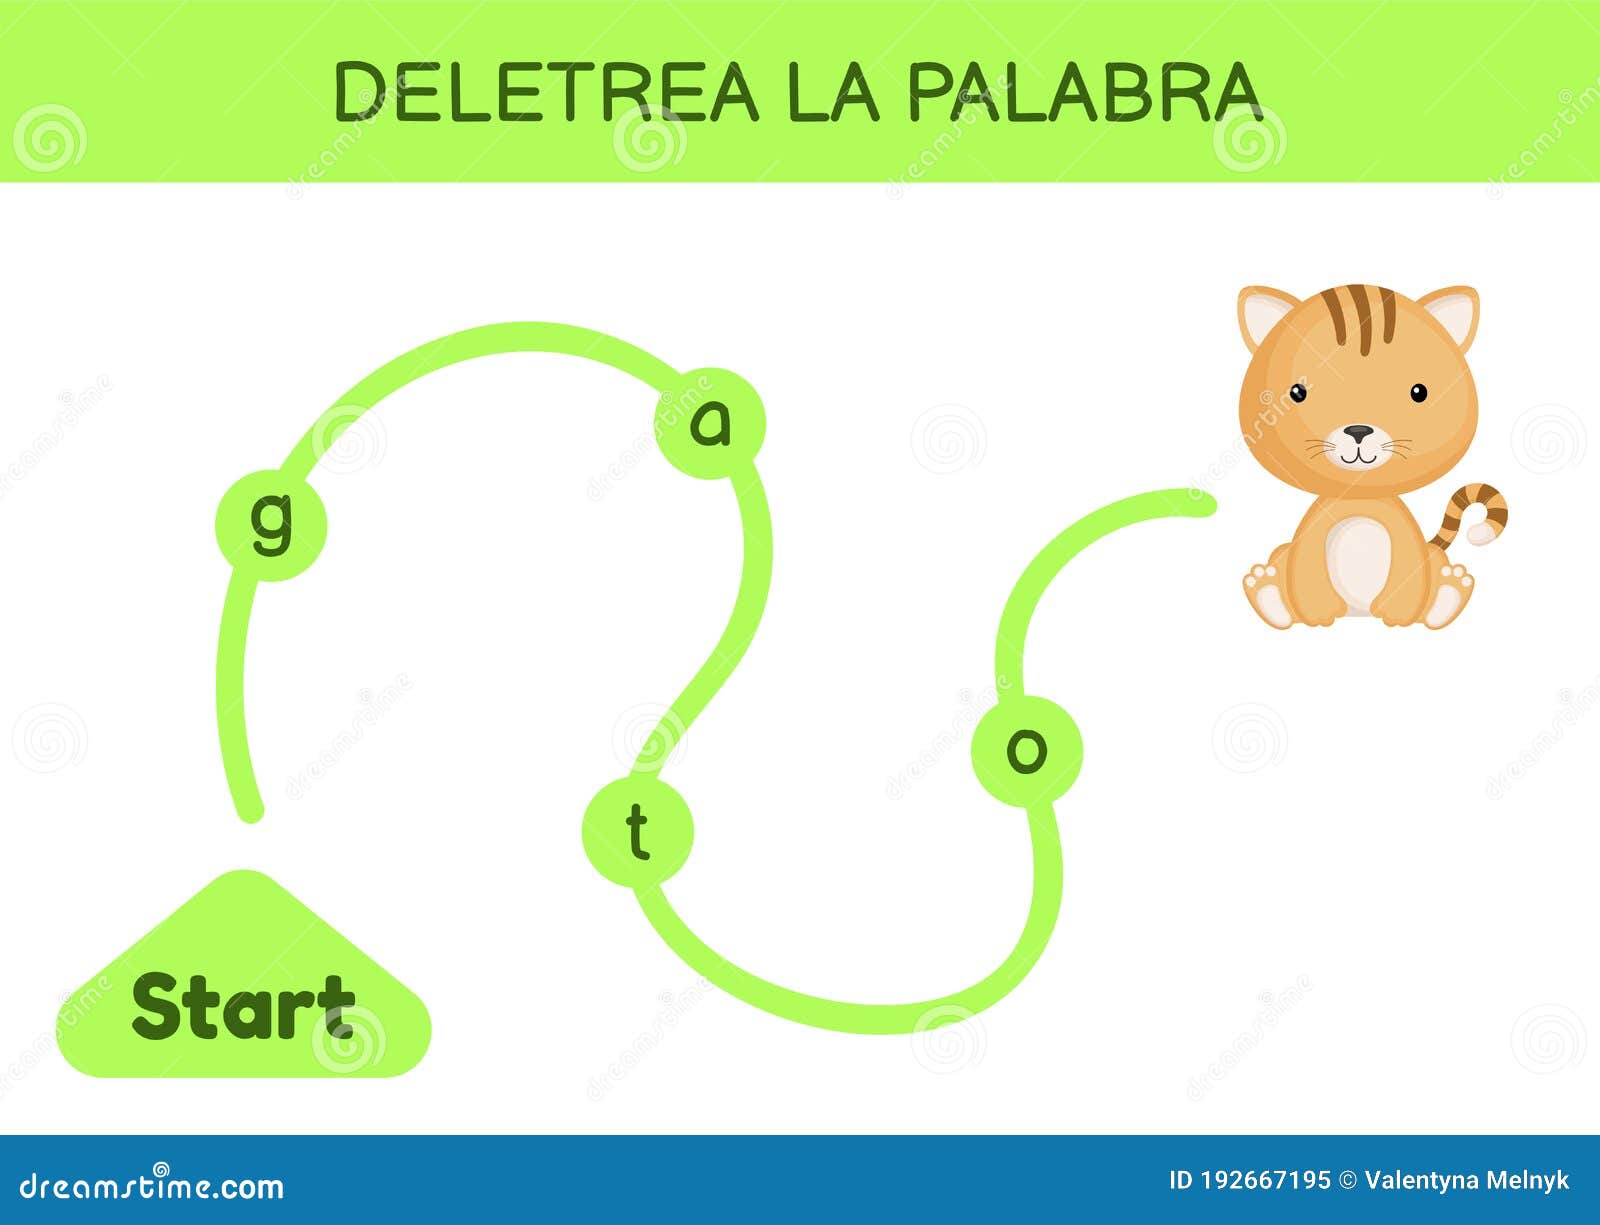 deletrea la palabra - spell the word. maze for kids. spelling word game template. learn to read word cat. activity page for study